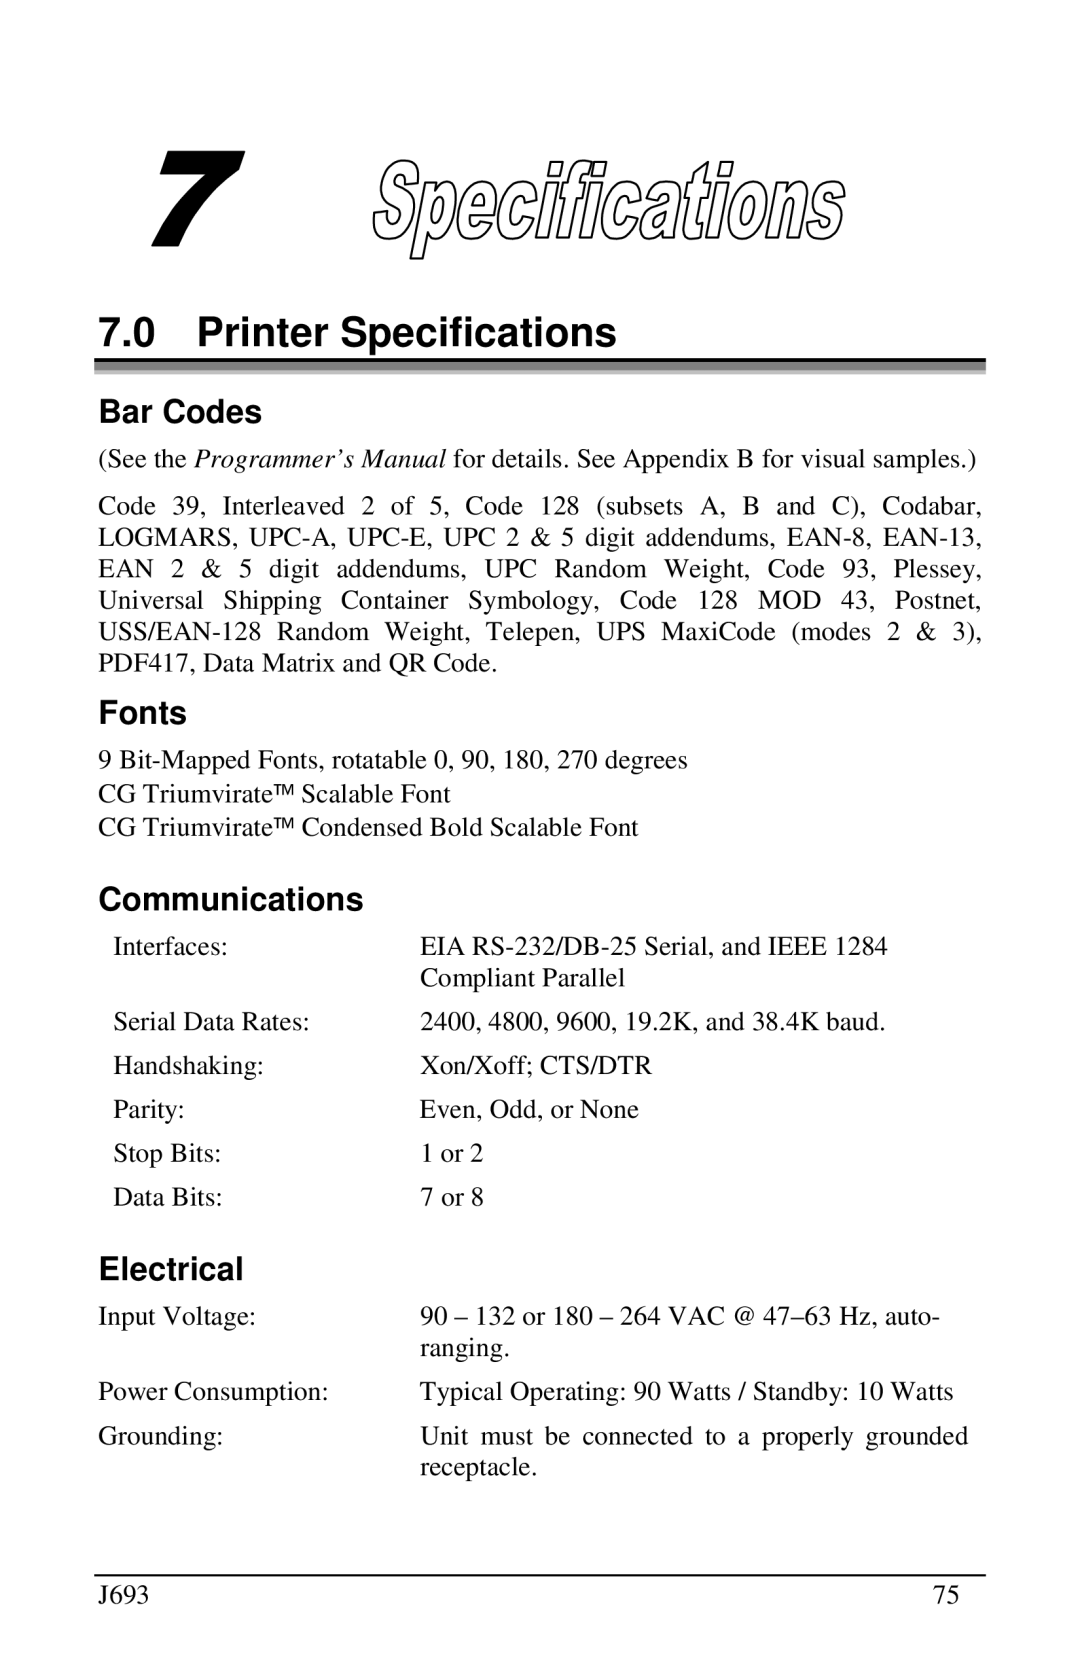 Pitney Bowes J693 manual Printer Specifications, Bar Codes, Fonts, Communications, Electrical 